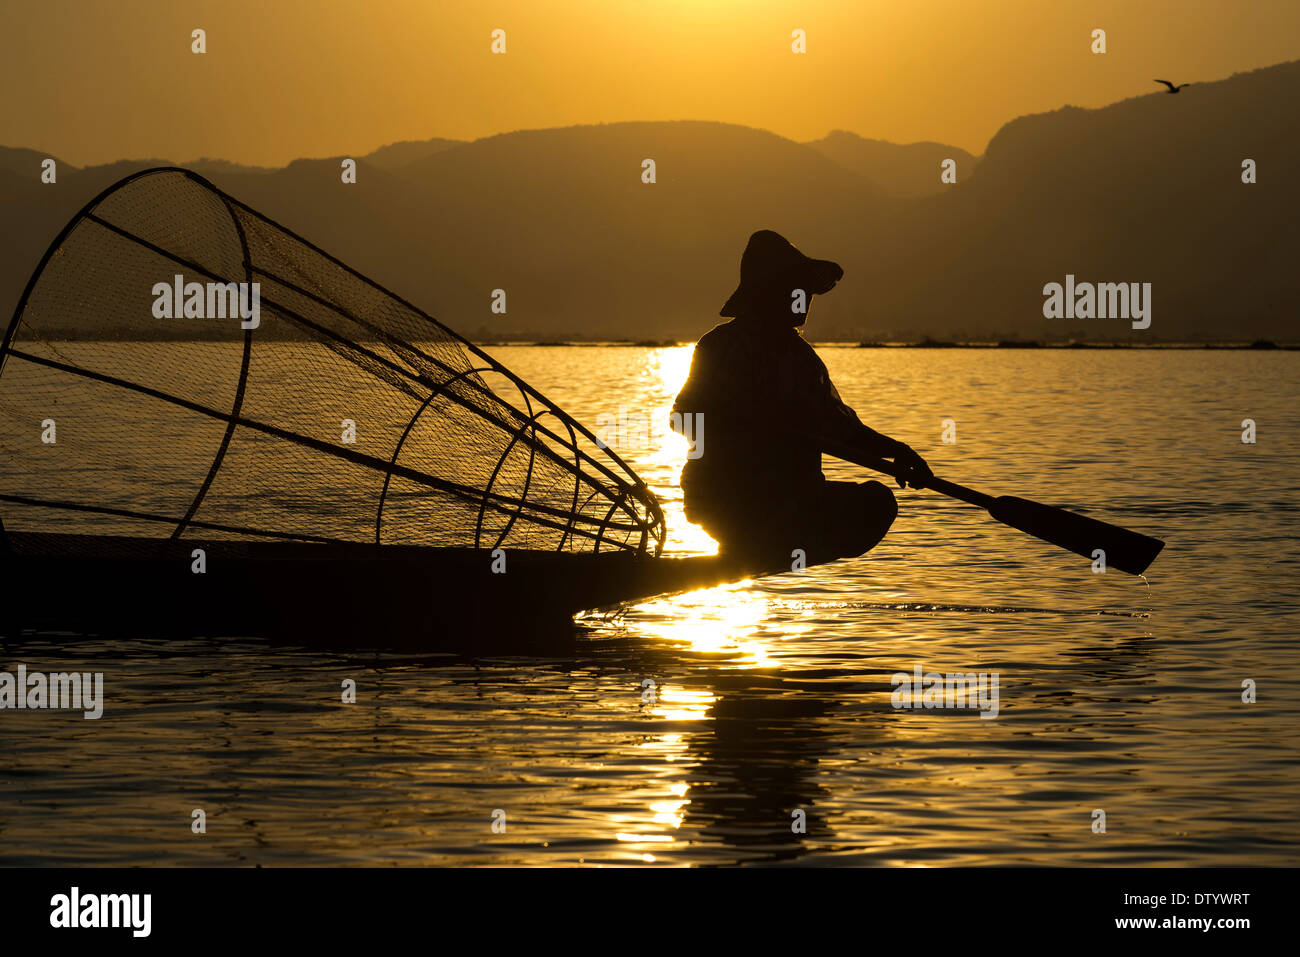 Fisherman in the evening light, with a traditional basket, sitting on the canoe, sunset at Inle Lake, Shan State, Myanmar Stock Photo